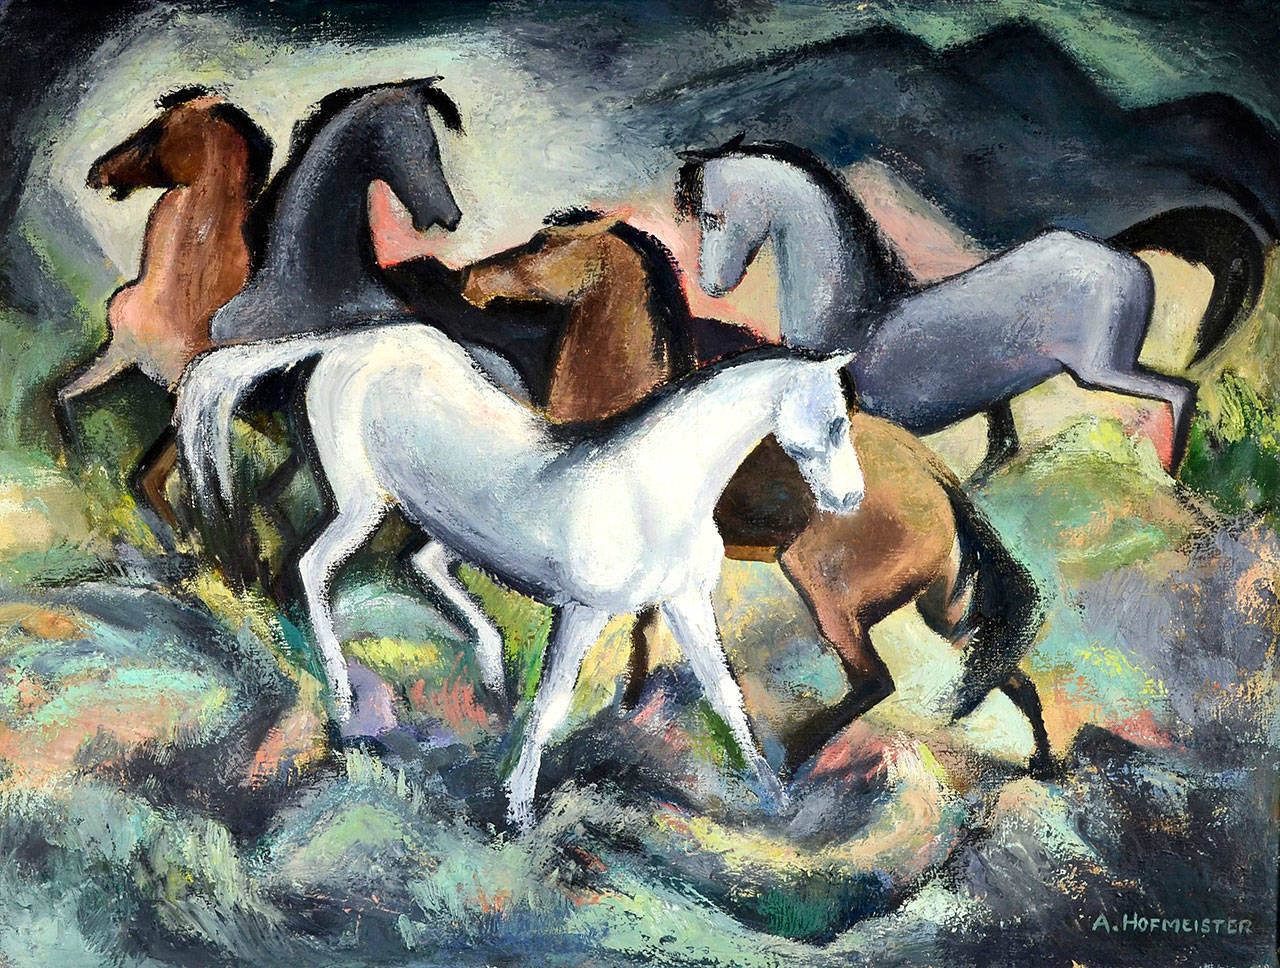 “Brushfire,” a 1946 oil on canvas by Andrew Hofmeister, the late Washington State University art instructor, is displayed at Cascadia Art Museum in Edmonds.